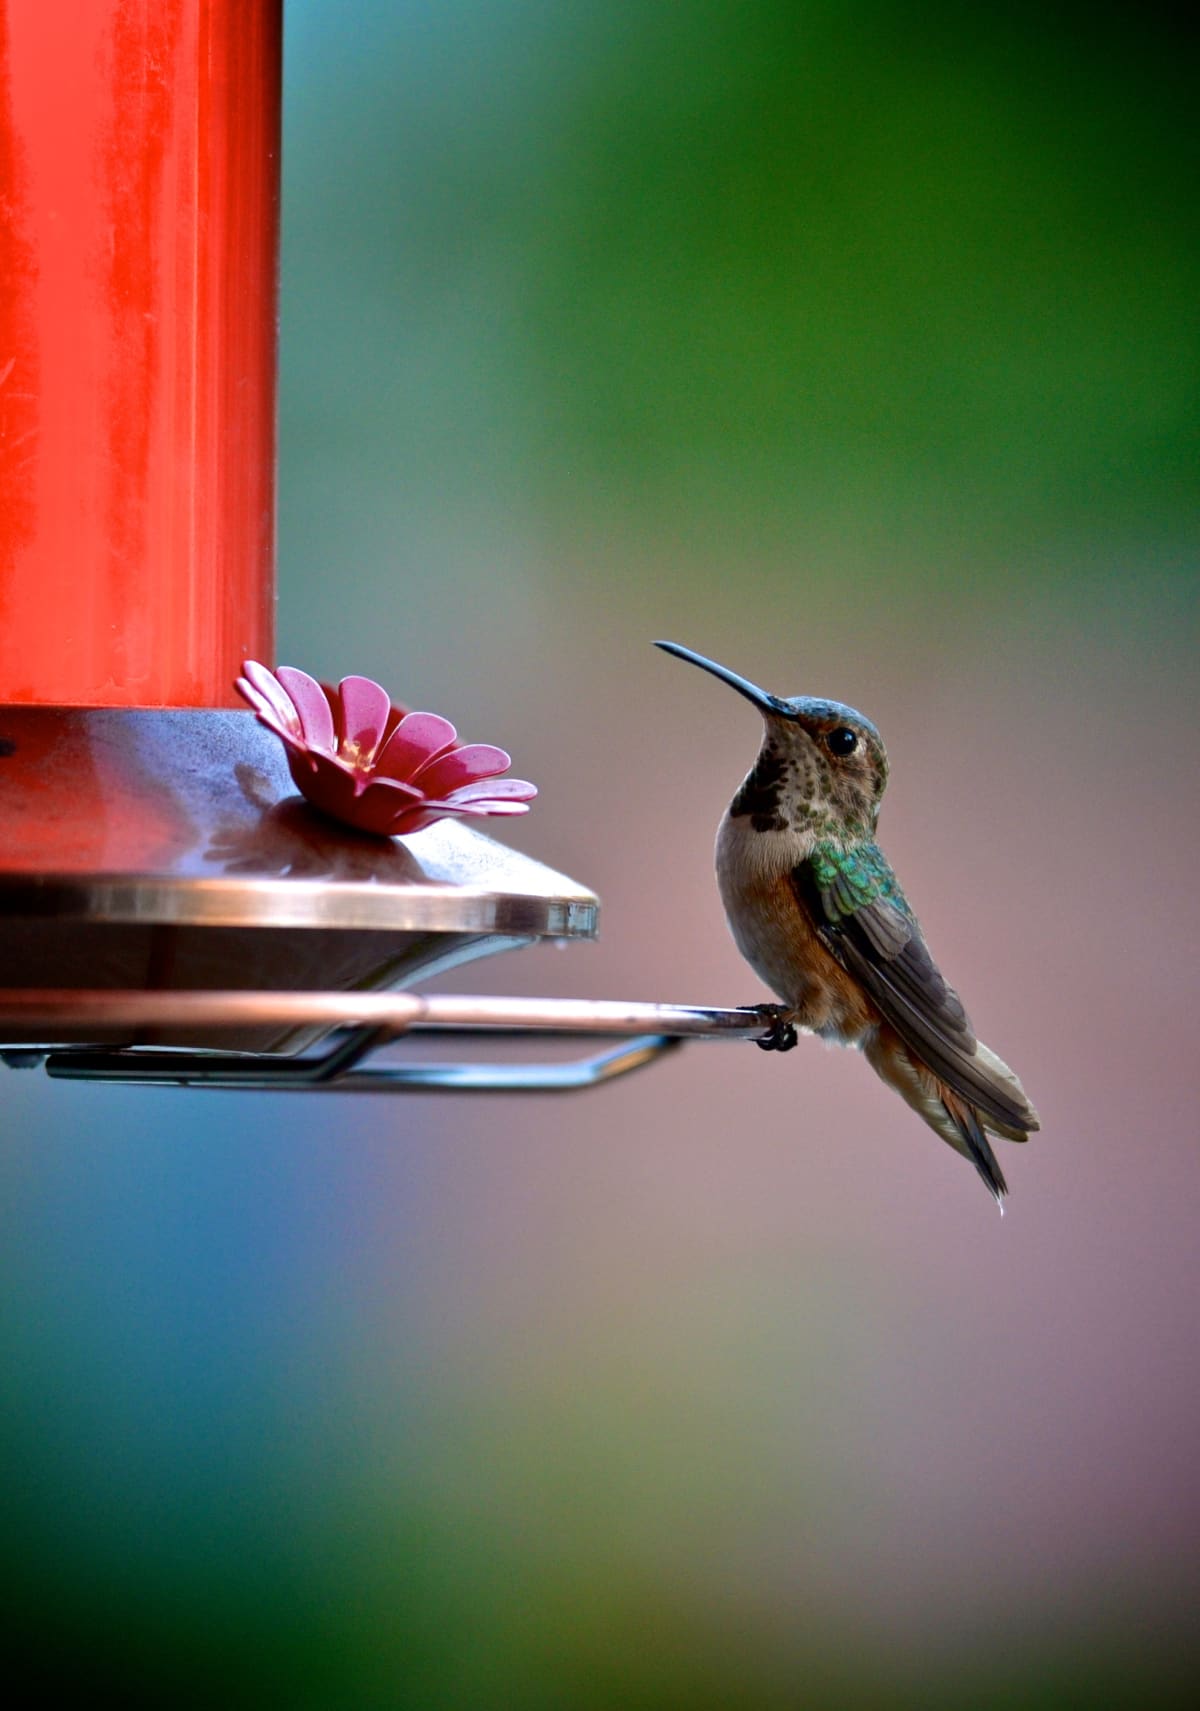 A hummingbird rests on a feeder